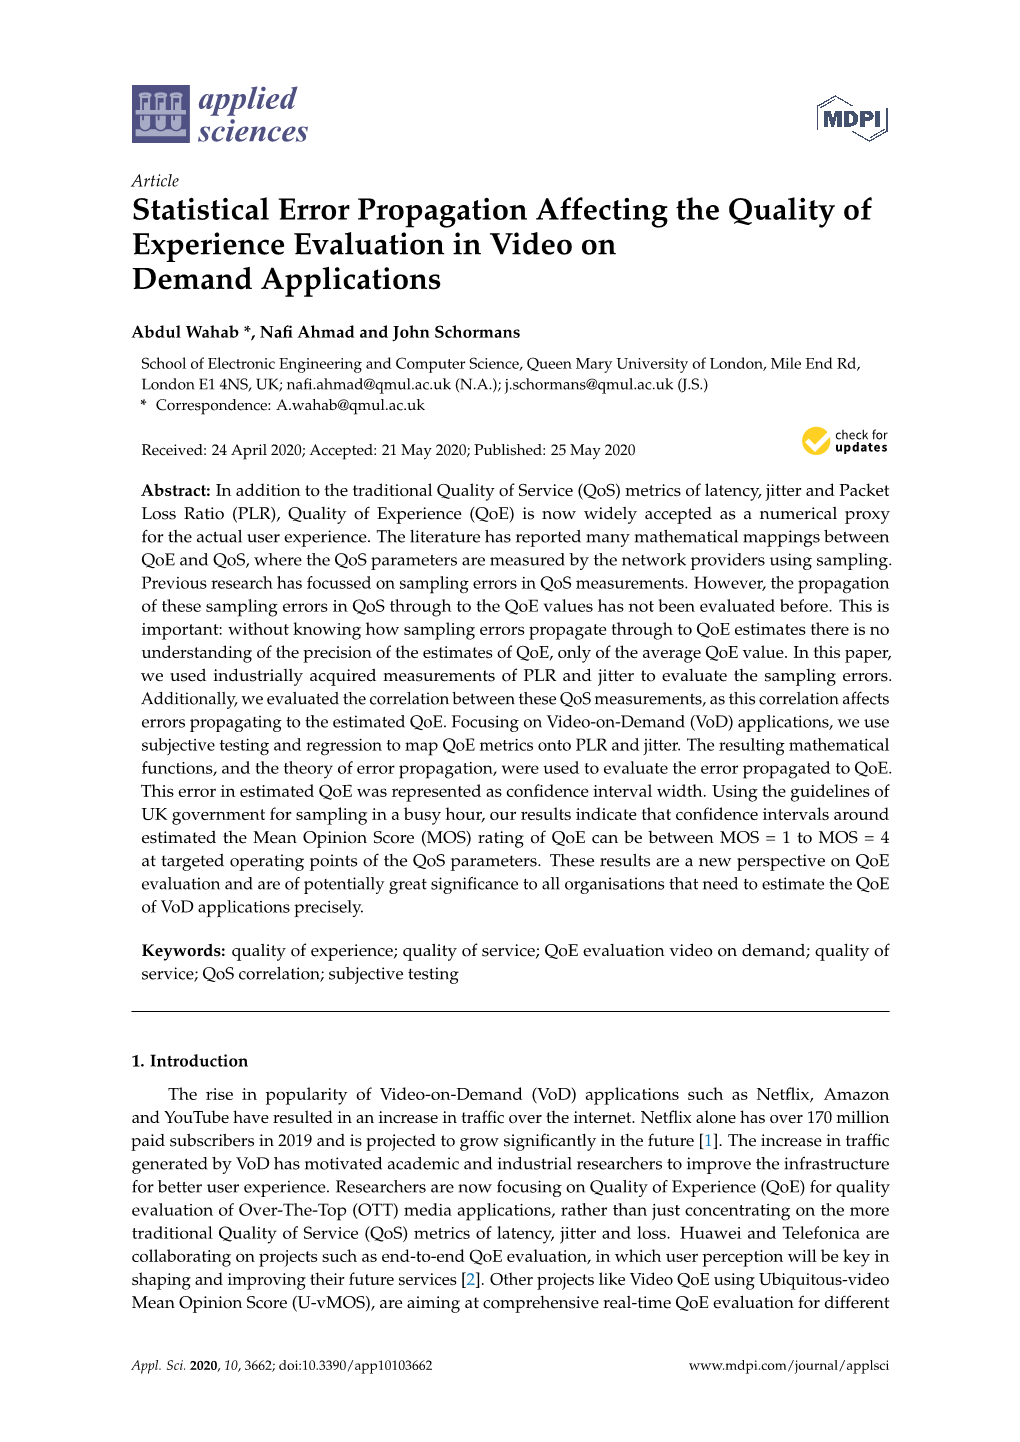 Statistical Error Propagation Affecting the Quality of Experience Evaluation in Video on Demand Applications